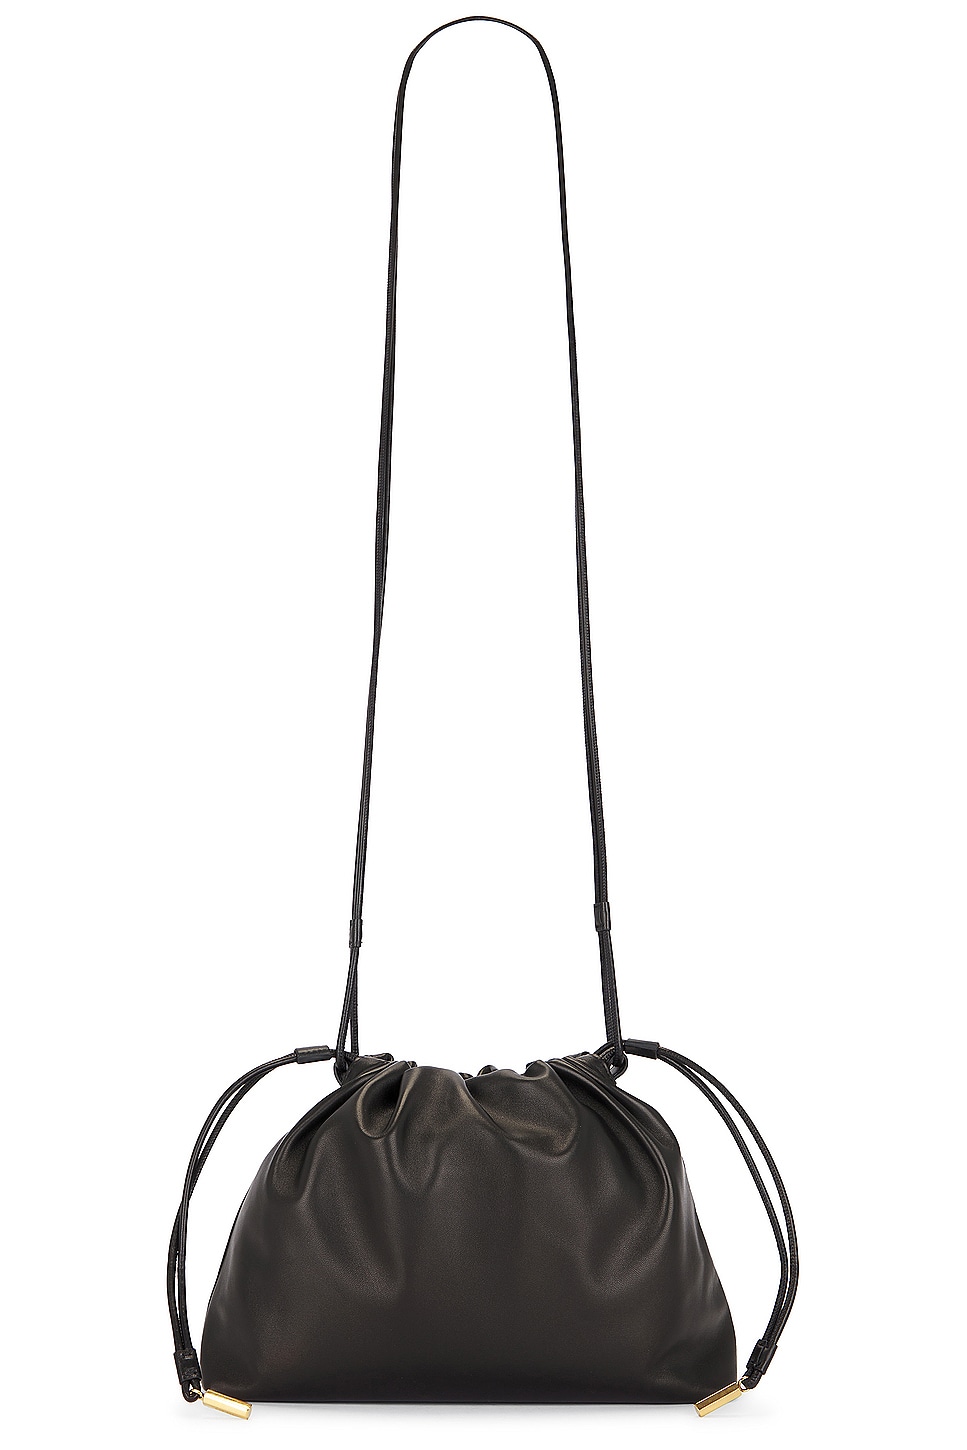 Angy Bag in Black